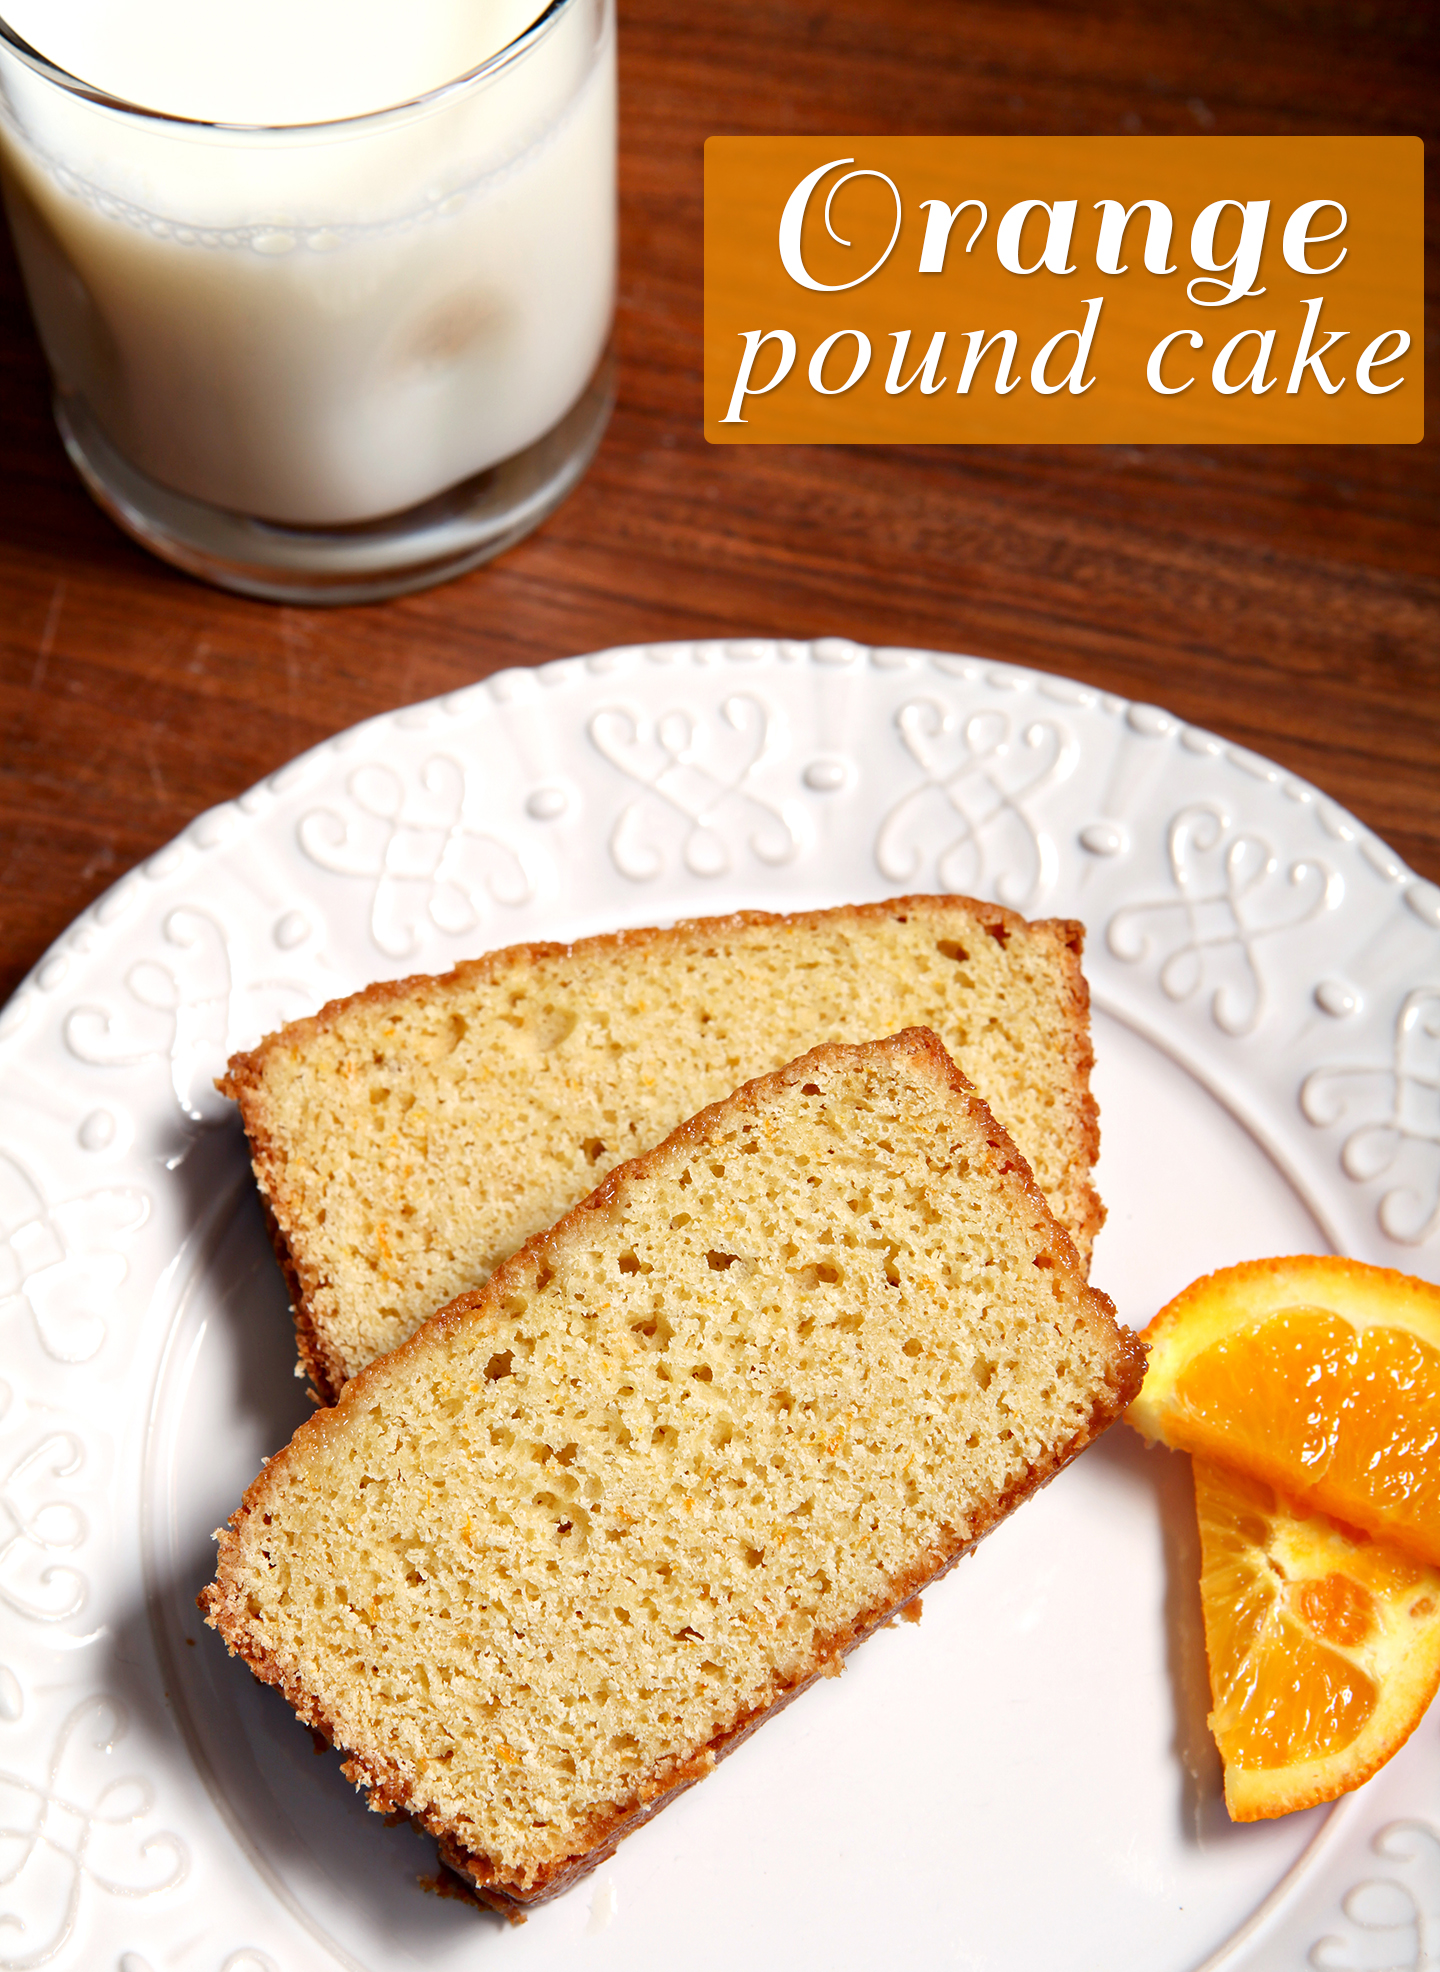 Orange Pound Cake | Bake your mama up a sweet surprise to start her Mother's Day with this Orange Pound Cake. Simple, delicious, slightly sweet and perfect with her morning coffee, your mom will adore this baked good! | @speckledpalate for @mycookingspot